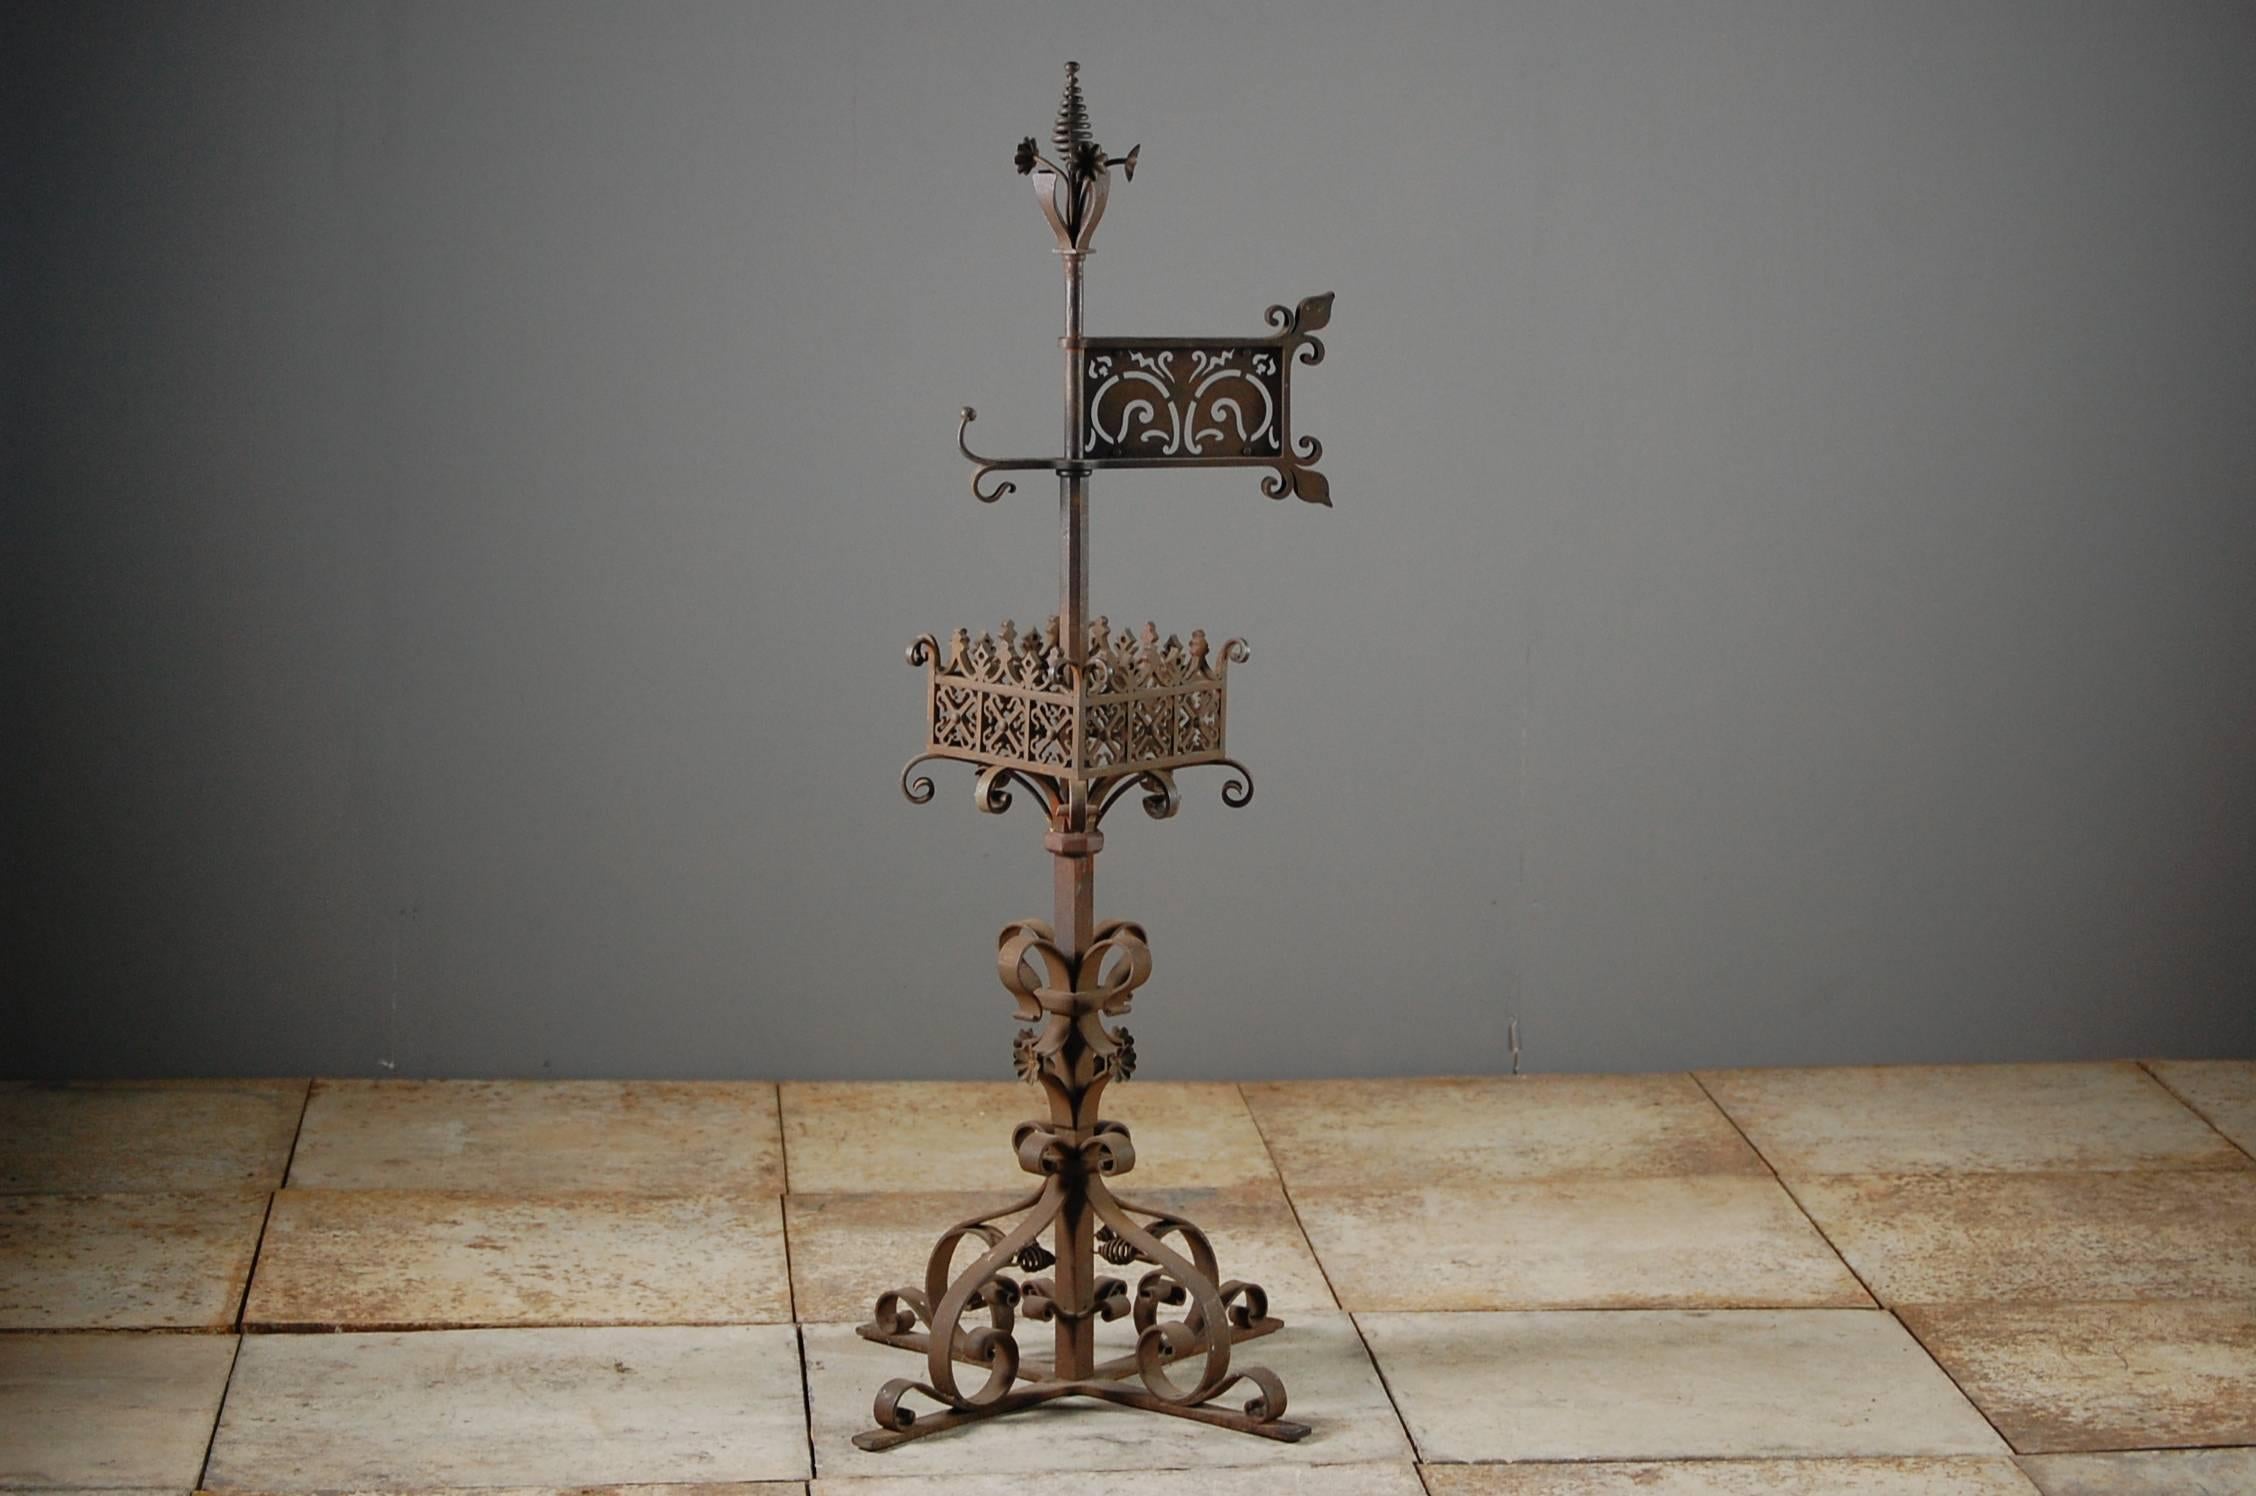 Highly intricate iron weathervane finial, highly decorative. France Early 20th Century.